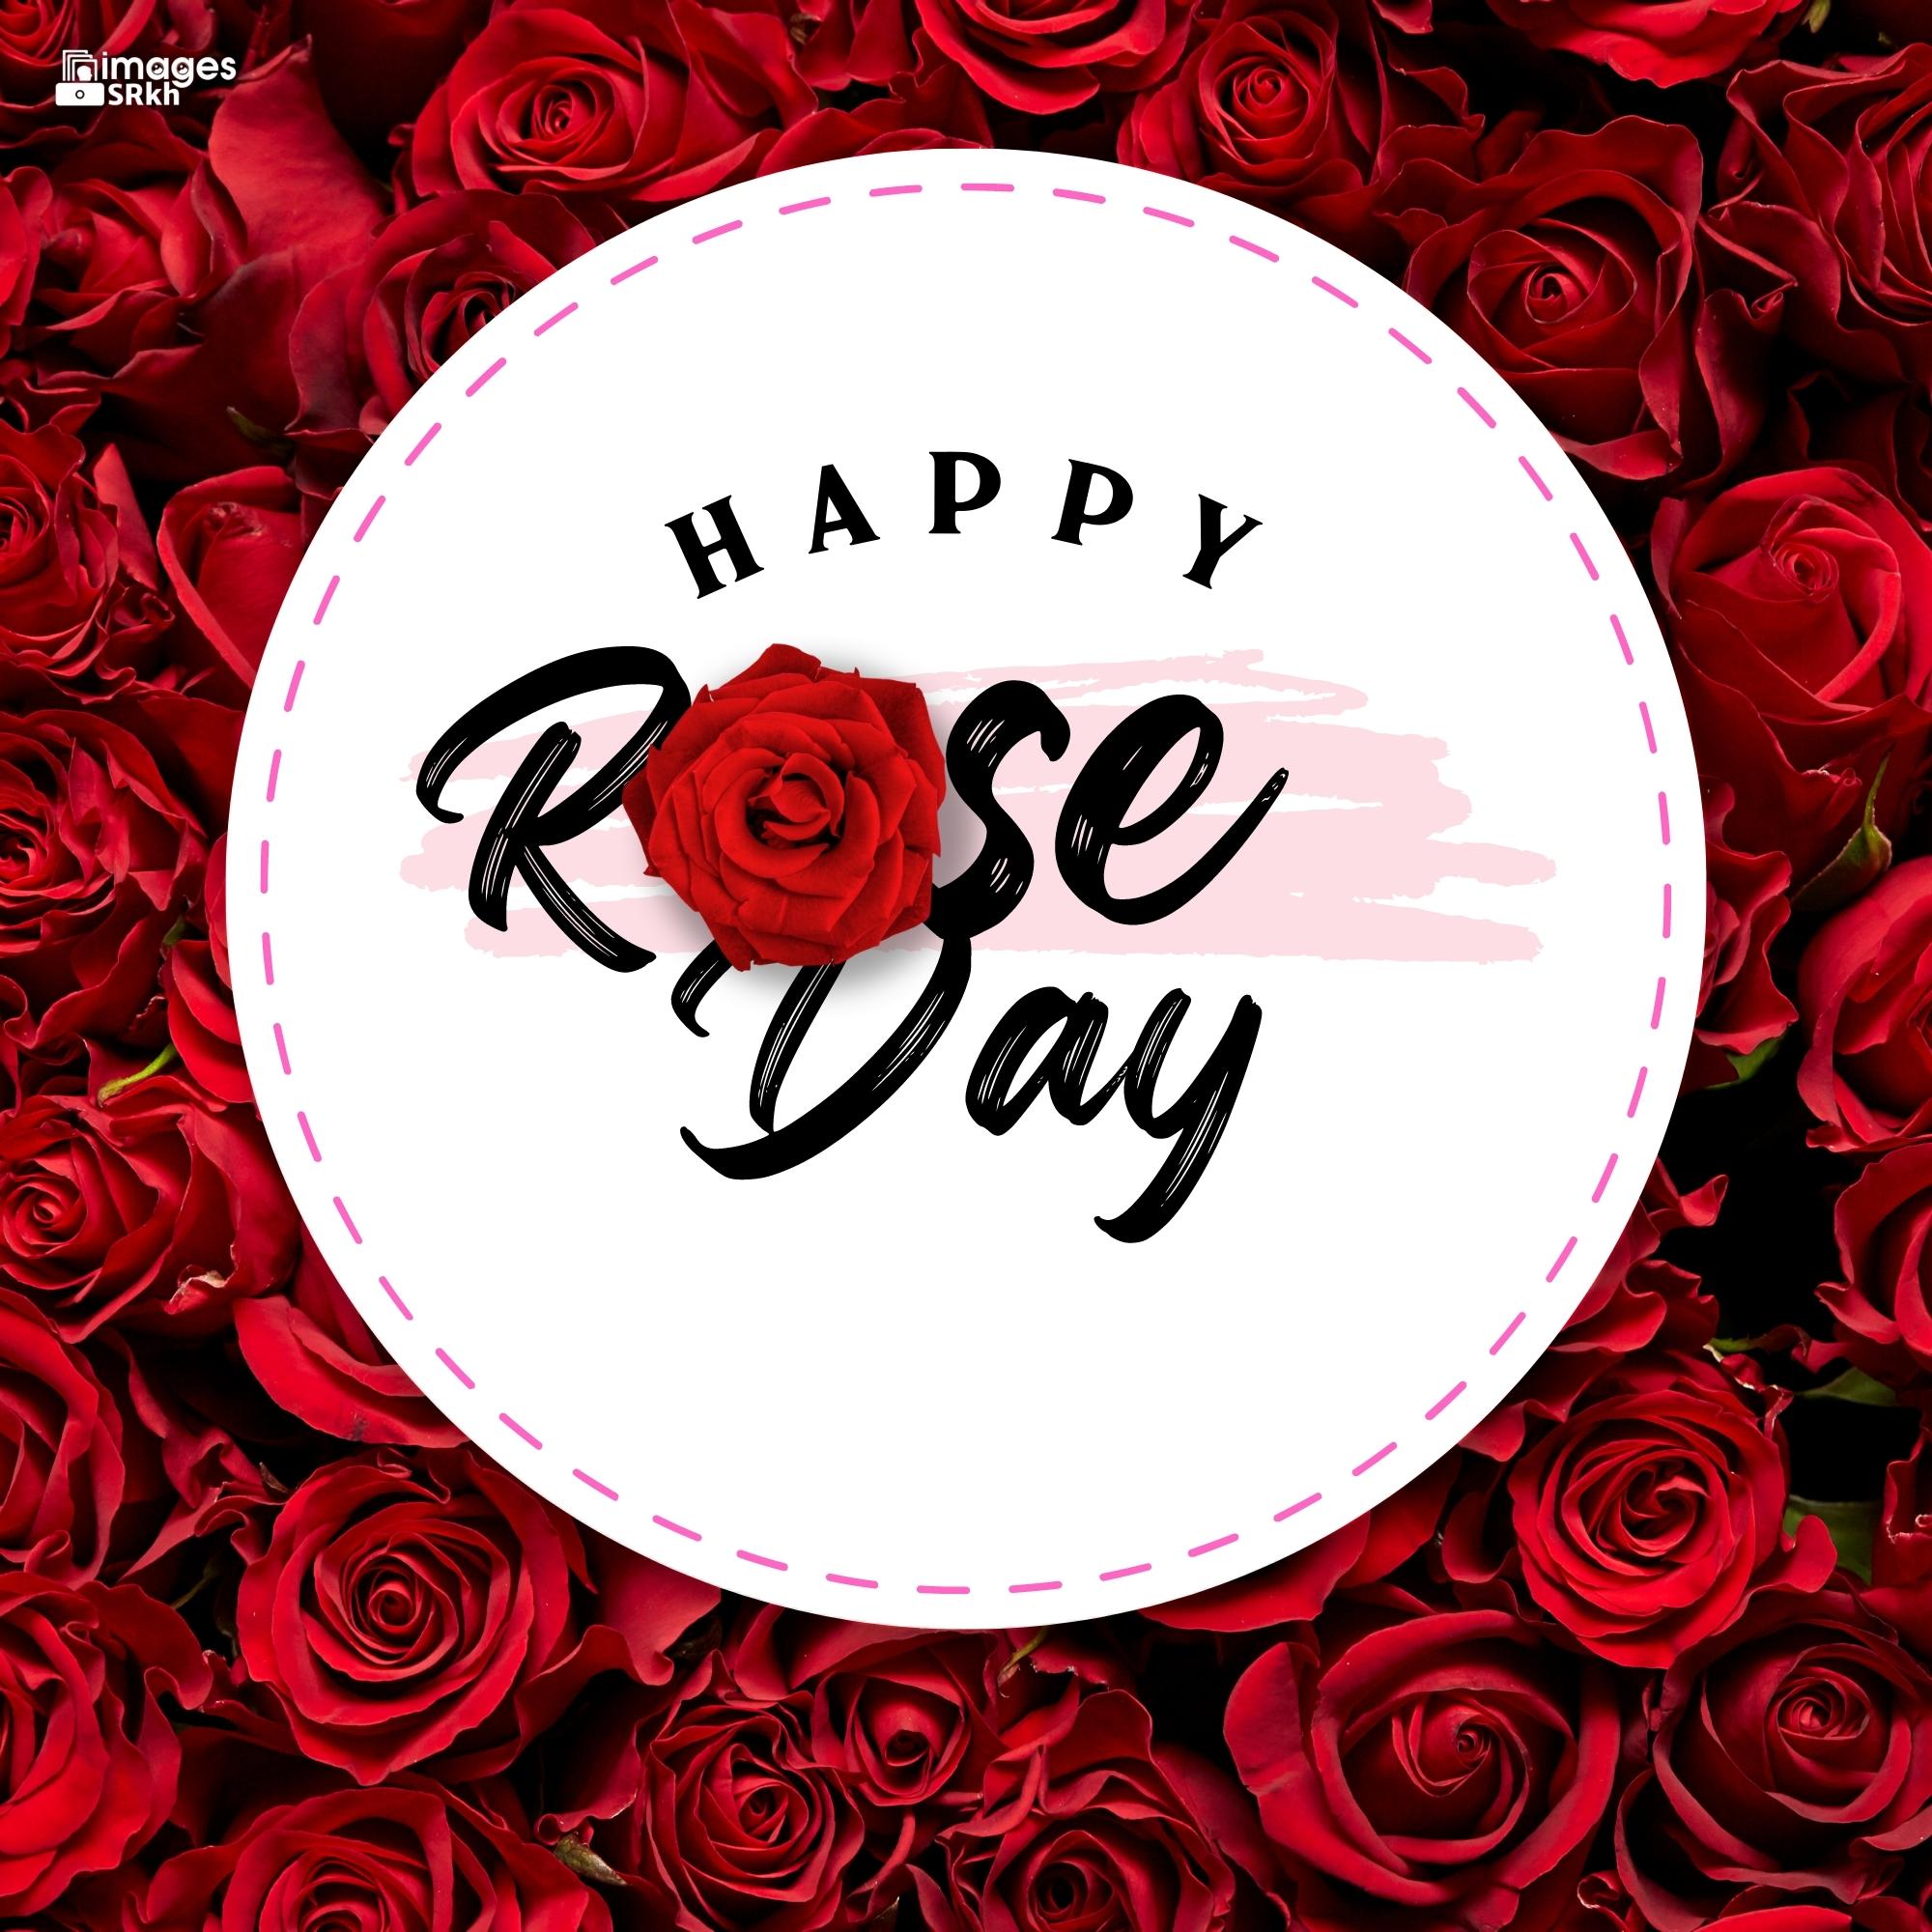 Happy Rose Day Image Hd Download (54)